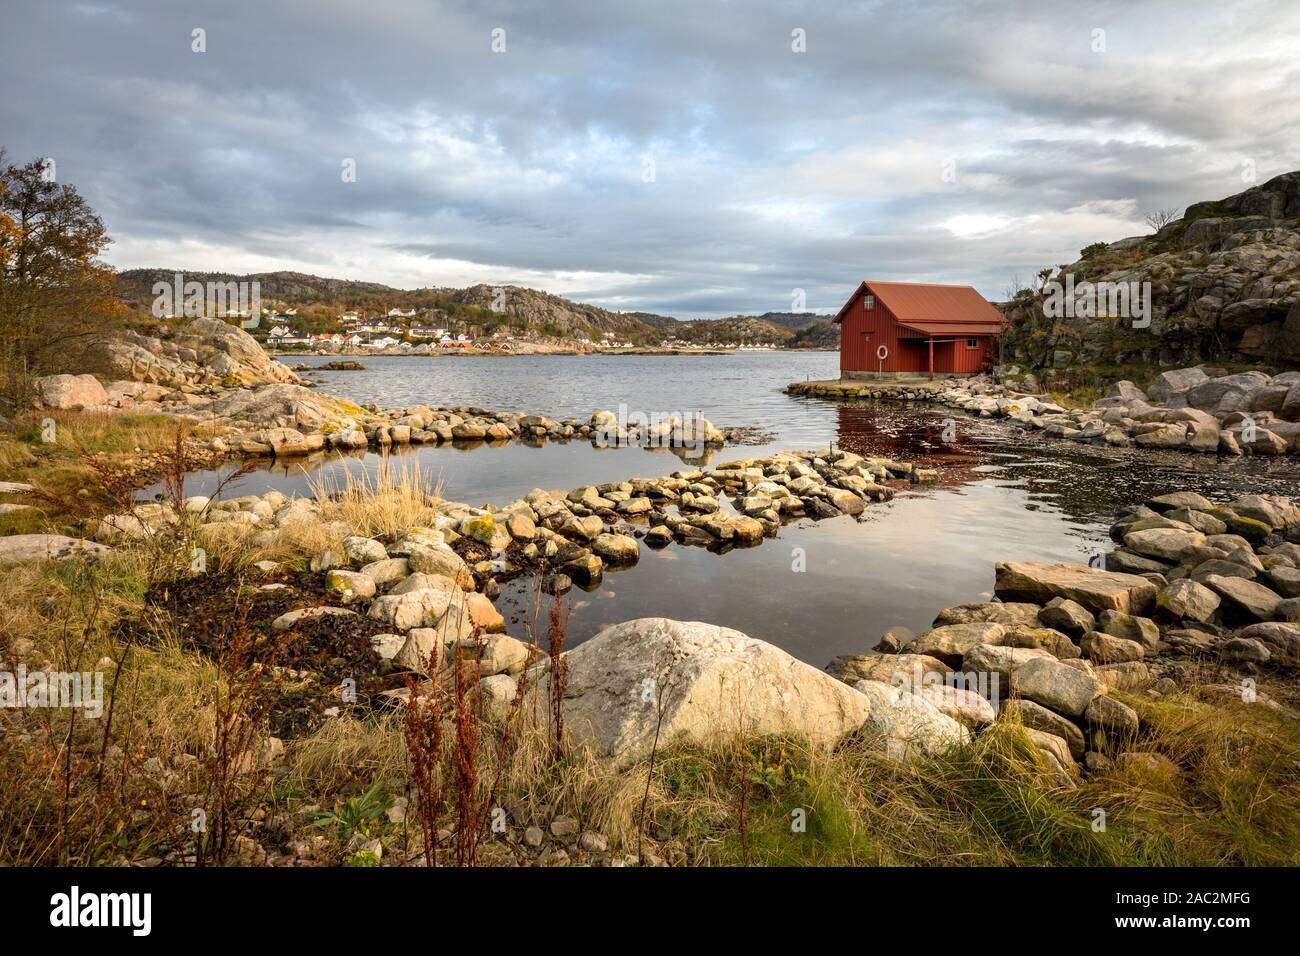 Spangereid, Norway, October 2019: Boat house by the fjord Stock Photo